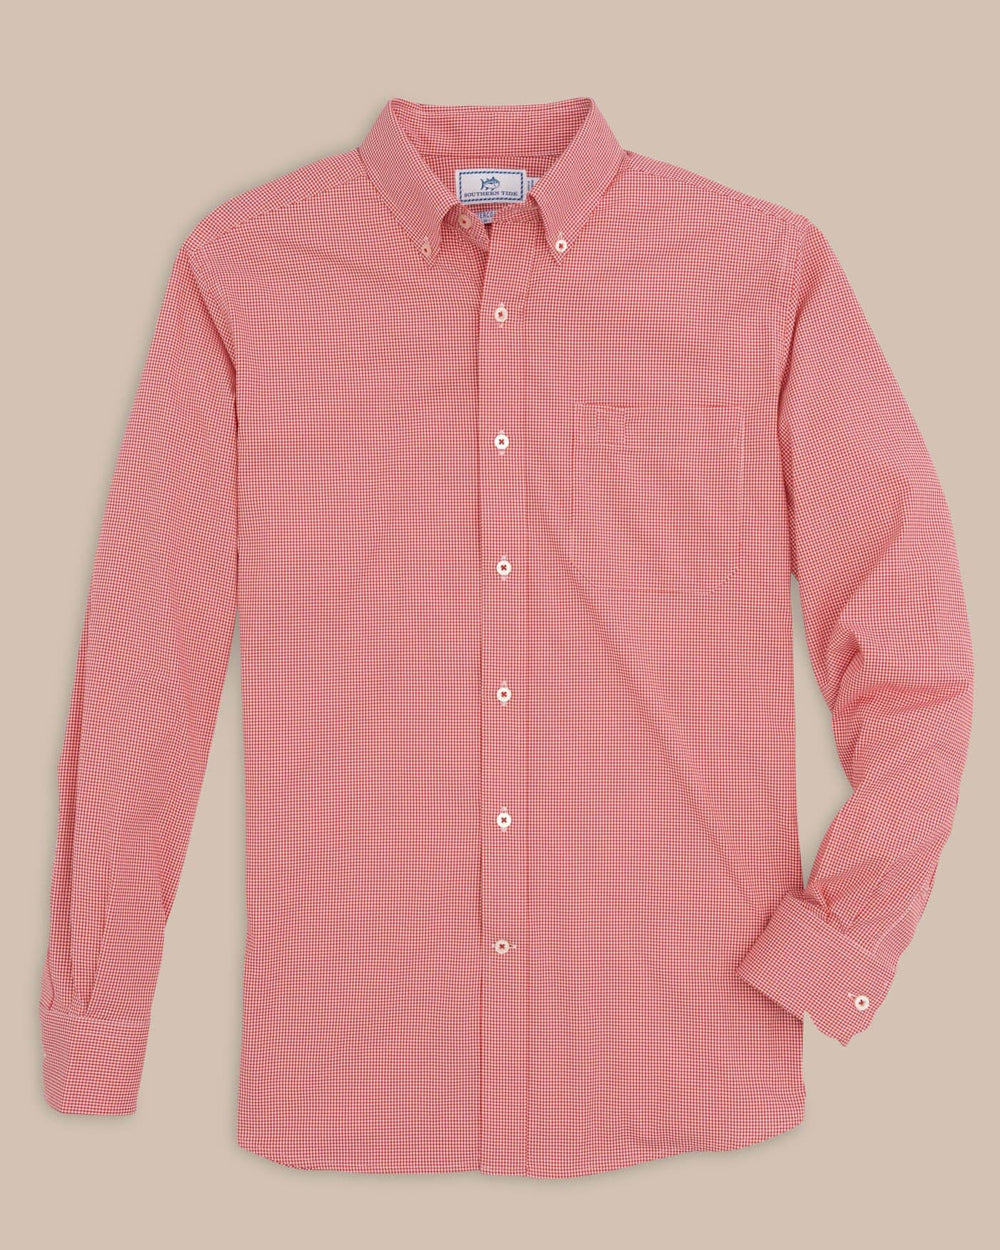 The front view of the Southern Tide Team Colors Gingham Intercoastal Sport Shirt by Southern Tide - Varsity Red